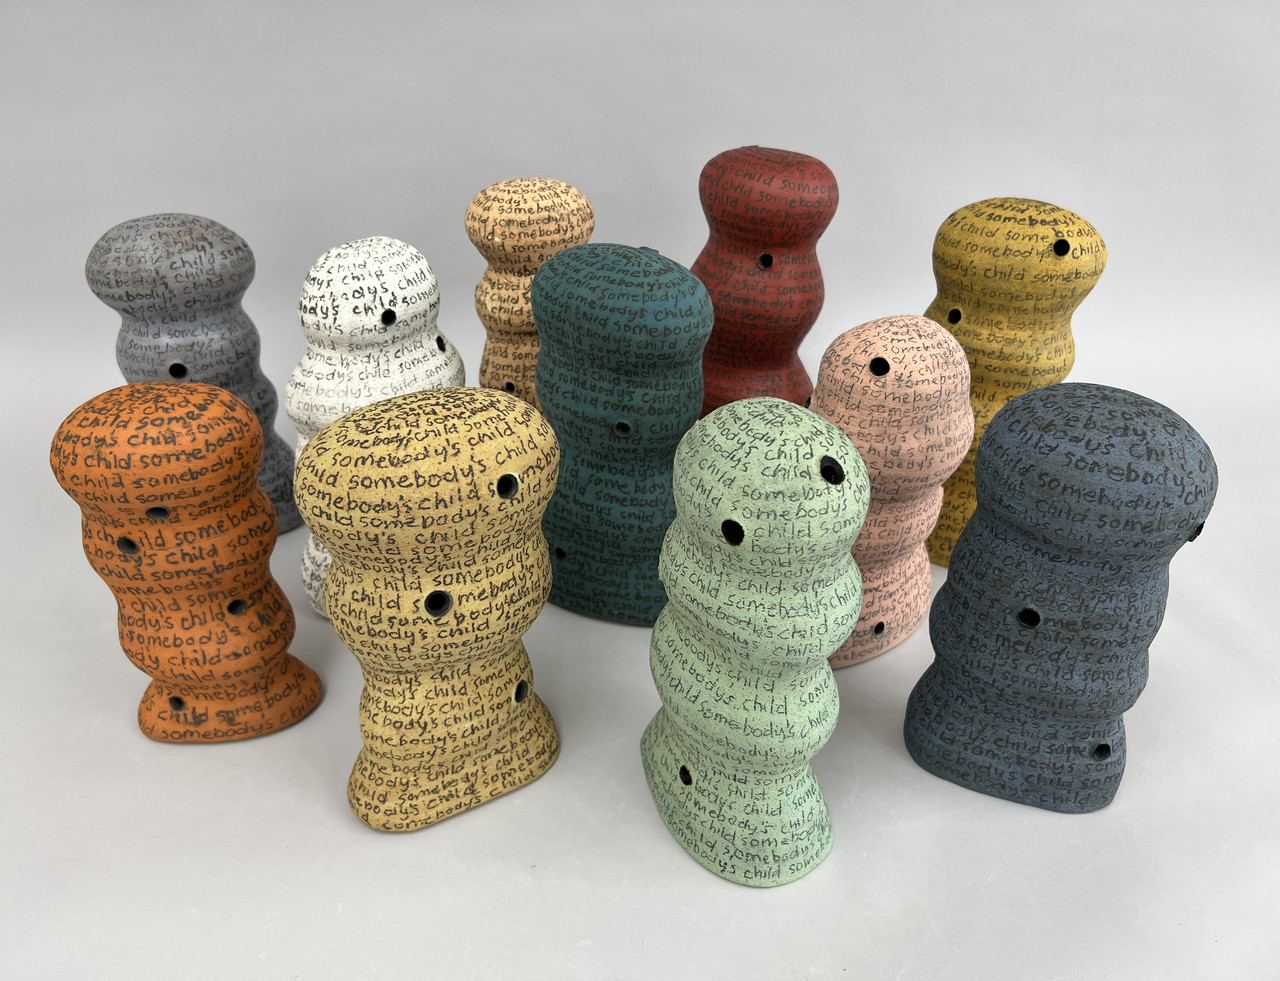 Grouping of ceramic structures assembled in a rounded ripple shape and painted in yellows, peaches, orange, greys, greens, and white colors. They have black holes and lettering around each stating 'somebody's child'.